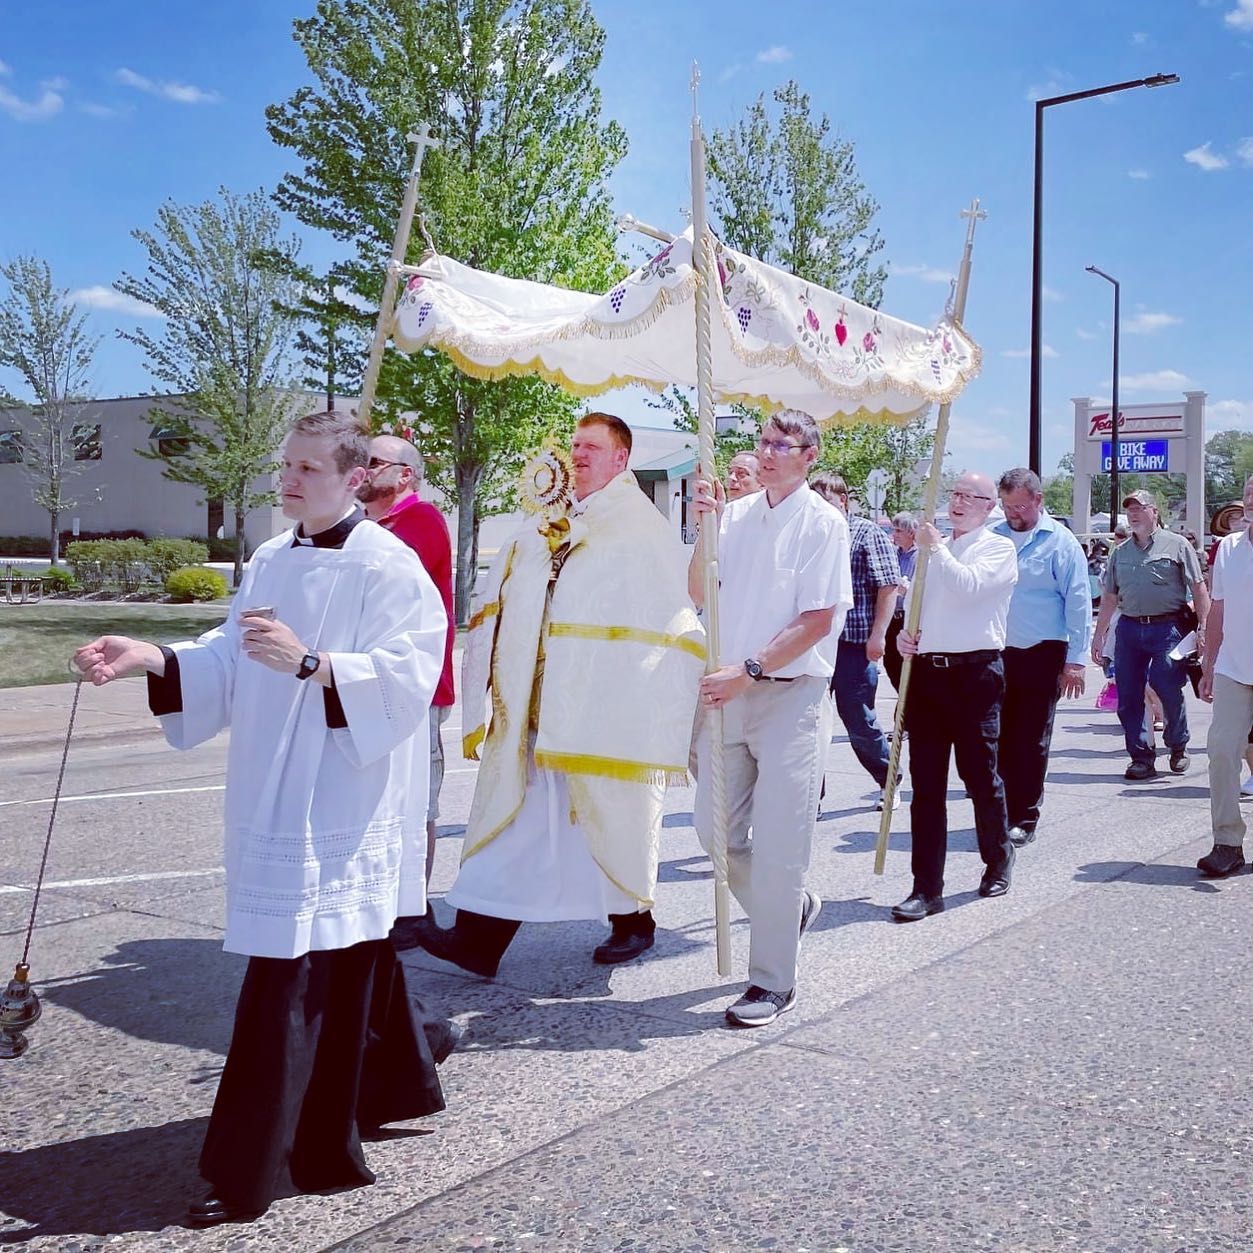 On the Solemnity of the Most Holy Body and Blood of Christ, June 19, many Catholic churches will hold Corpus Christi processions as a public affirmation of faith and belief in the Real Presence of Christ in the Eucharist.

Is your parish or Area Catholic Community organizing a Corpus Christi procession on June 19? If so, tell us the time and place in the comments area below. Also, if you'd like, tell us why you participate in this tradition. #eucharisticrevival #catholicproudstcloud